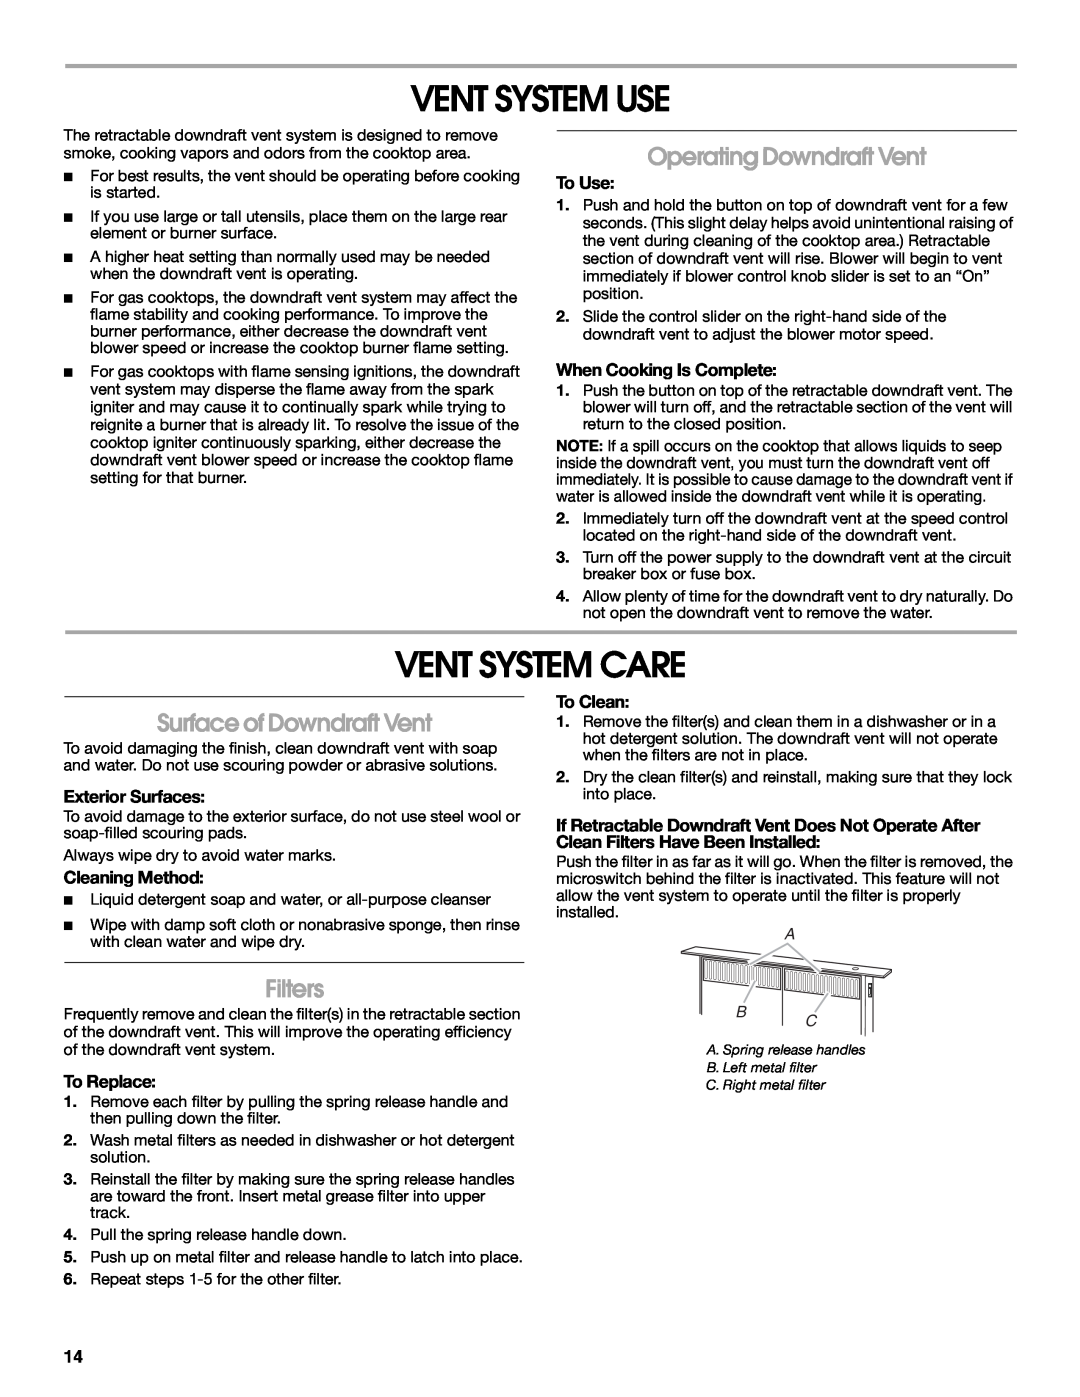 Jenn-Air W10342490D Vent System Use, Vent System Care, Operating Downdraft Vent, Surface of Downdraft Vent, Filters 